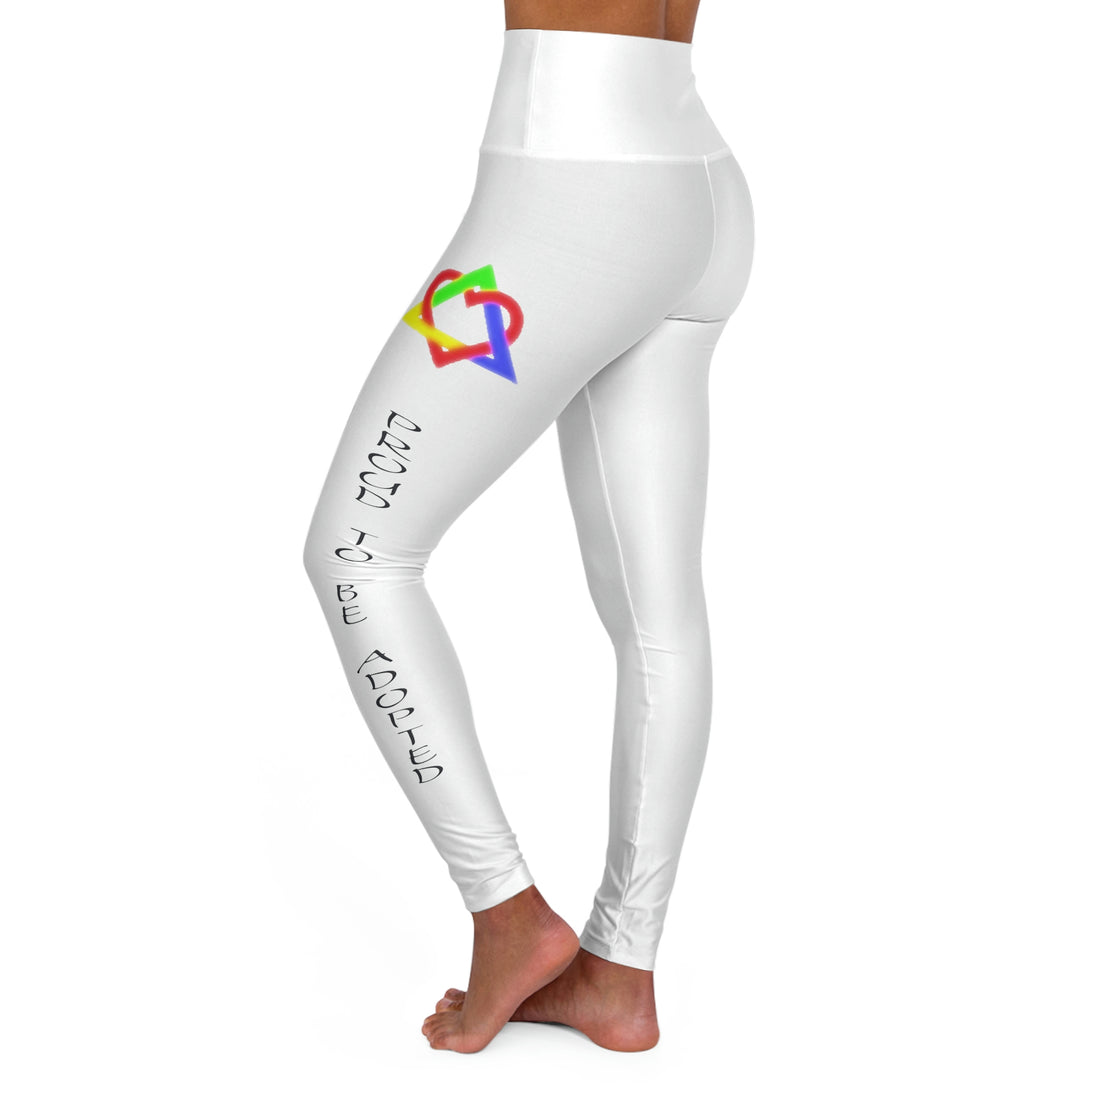 Proud to be Adopted - White High Waisted Yoga Leggings